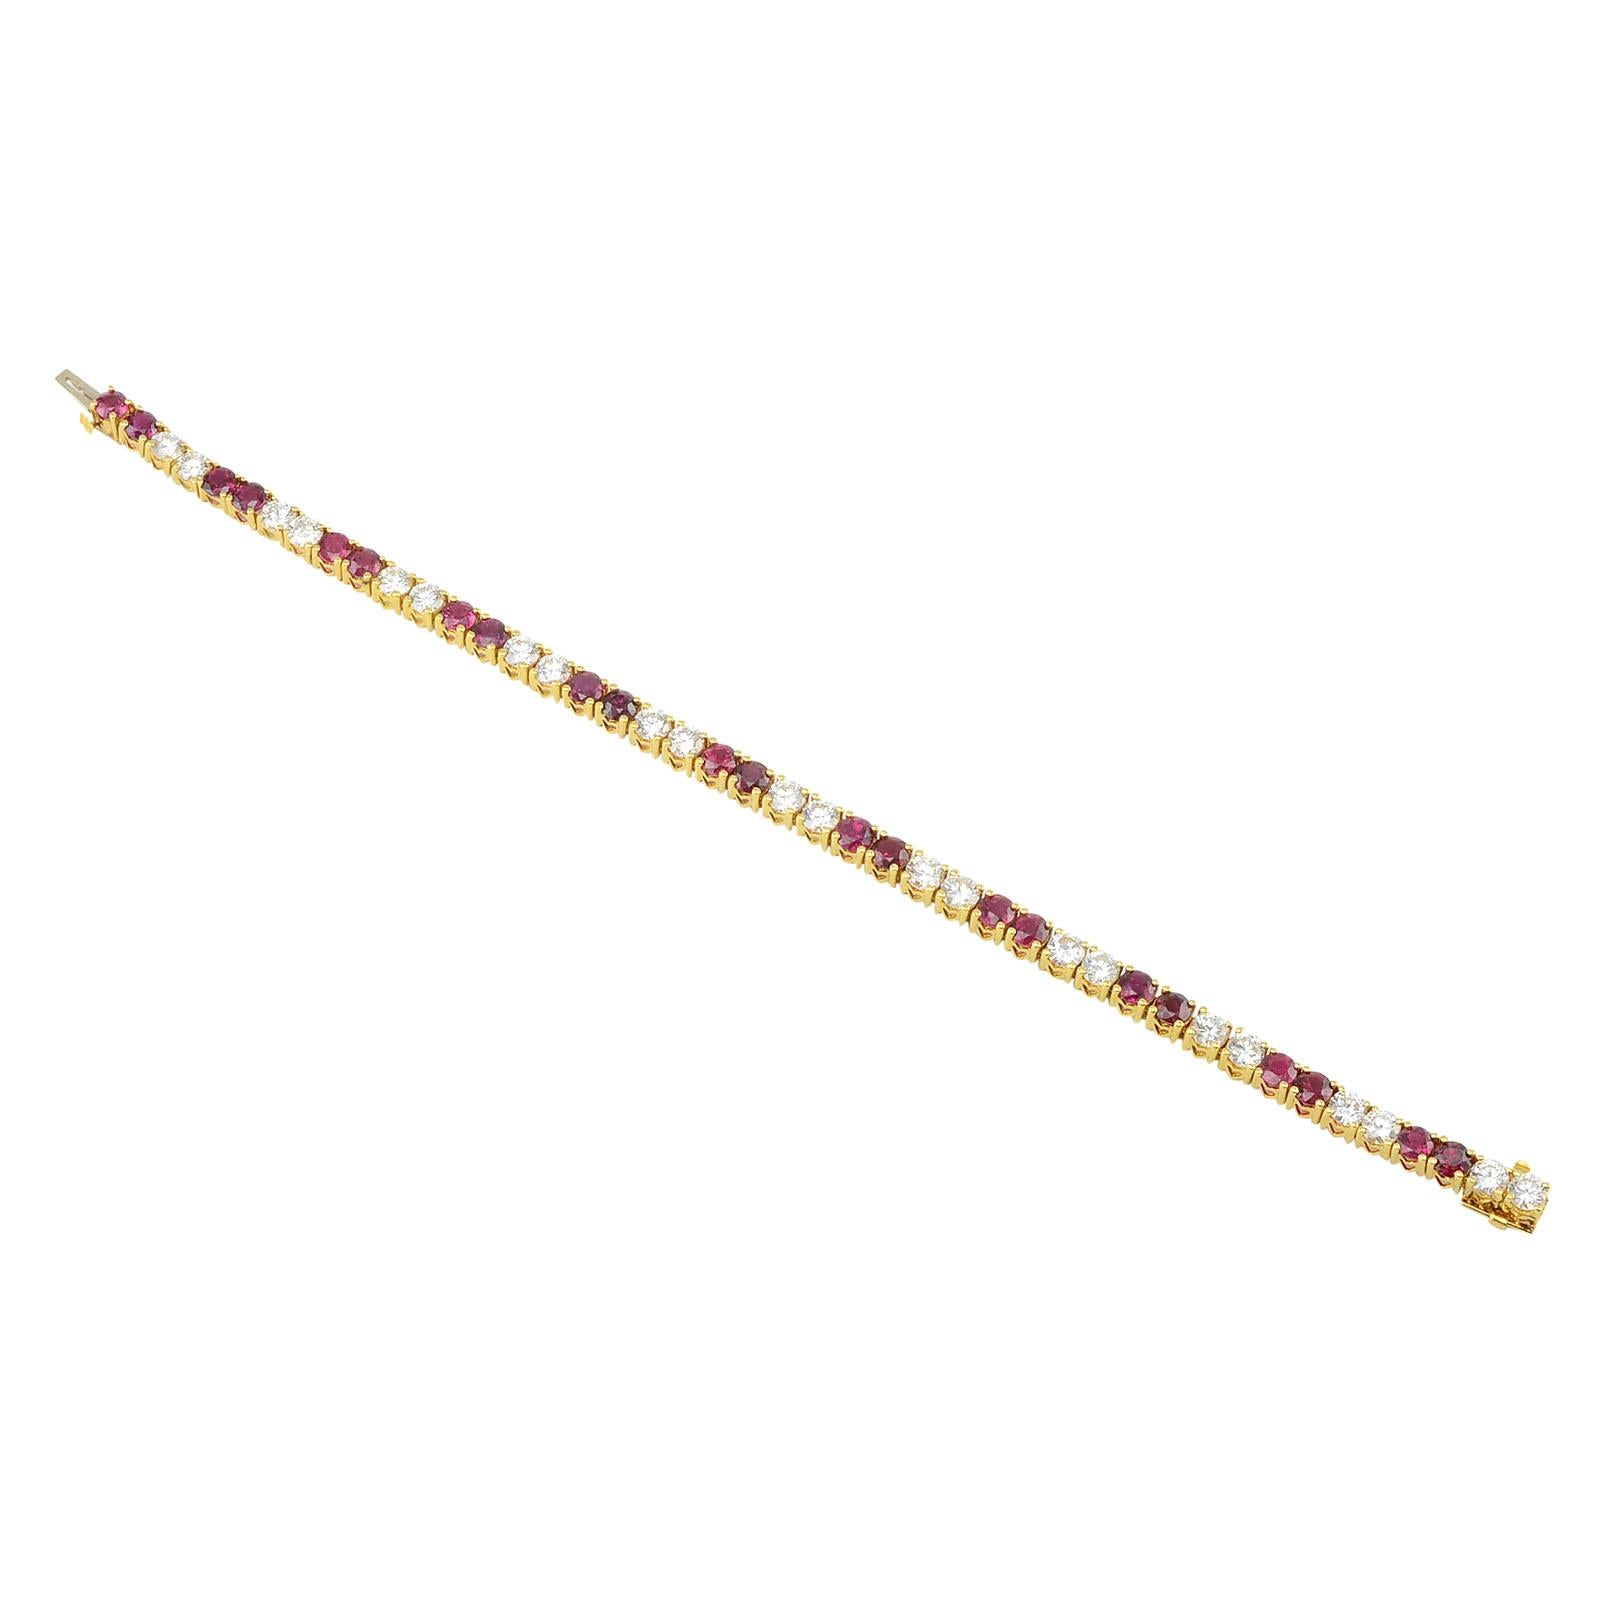 Estate 18K yellow gold 5.75 CTW ruby and 5.50 CTW diamond tennis bracelet. This ruby diamond bracelet has 22 round brilliant diamonds at 5.50 carat total weight VS1-SI1 clarity F-H color and 22 round rubies at 5.75 carat total weight set in a heart